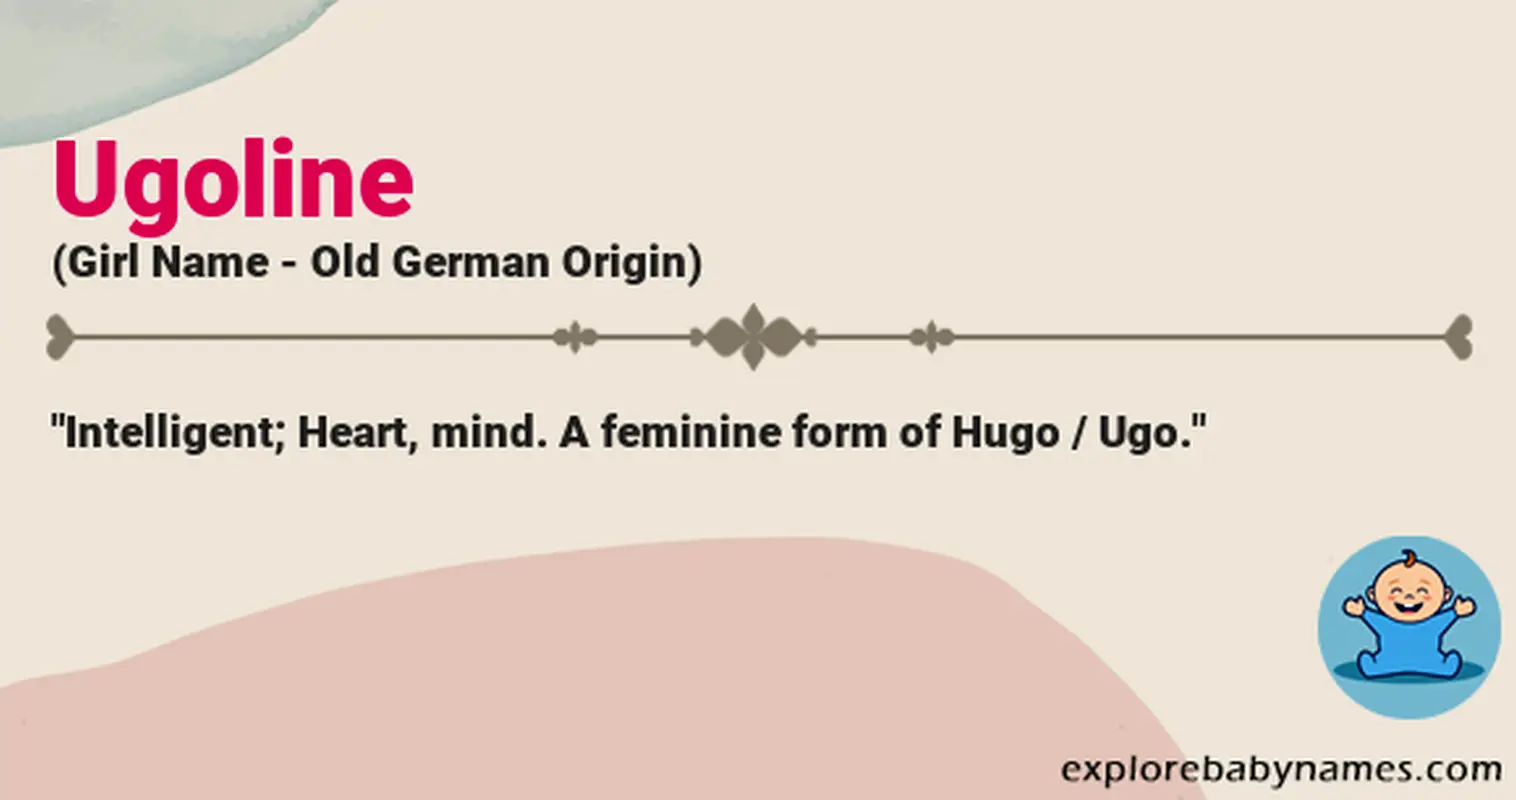 Meaning of Ugoline